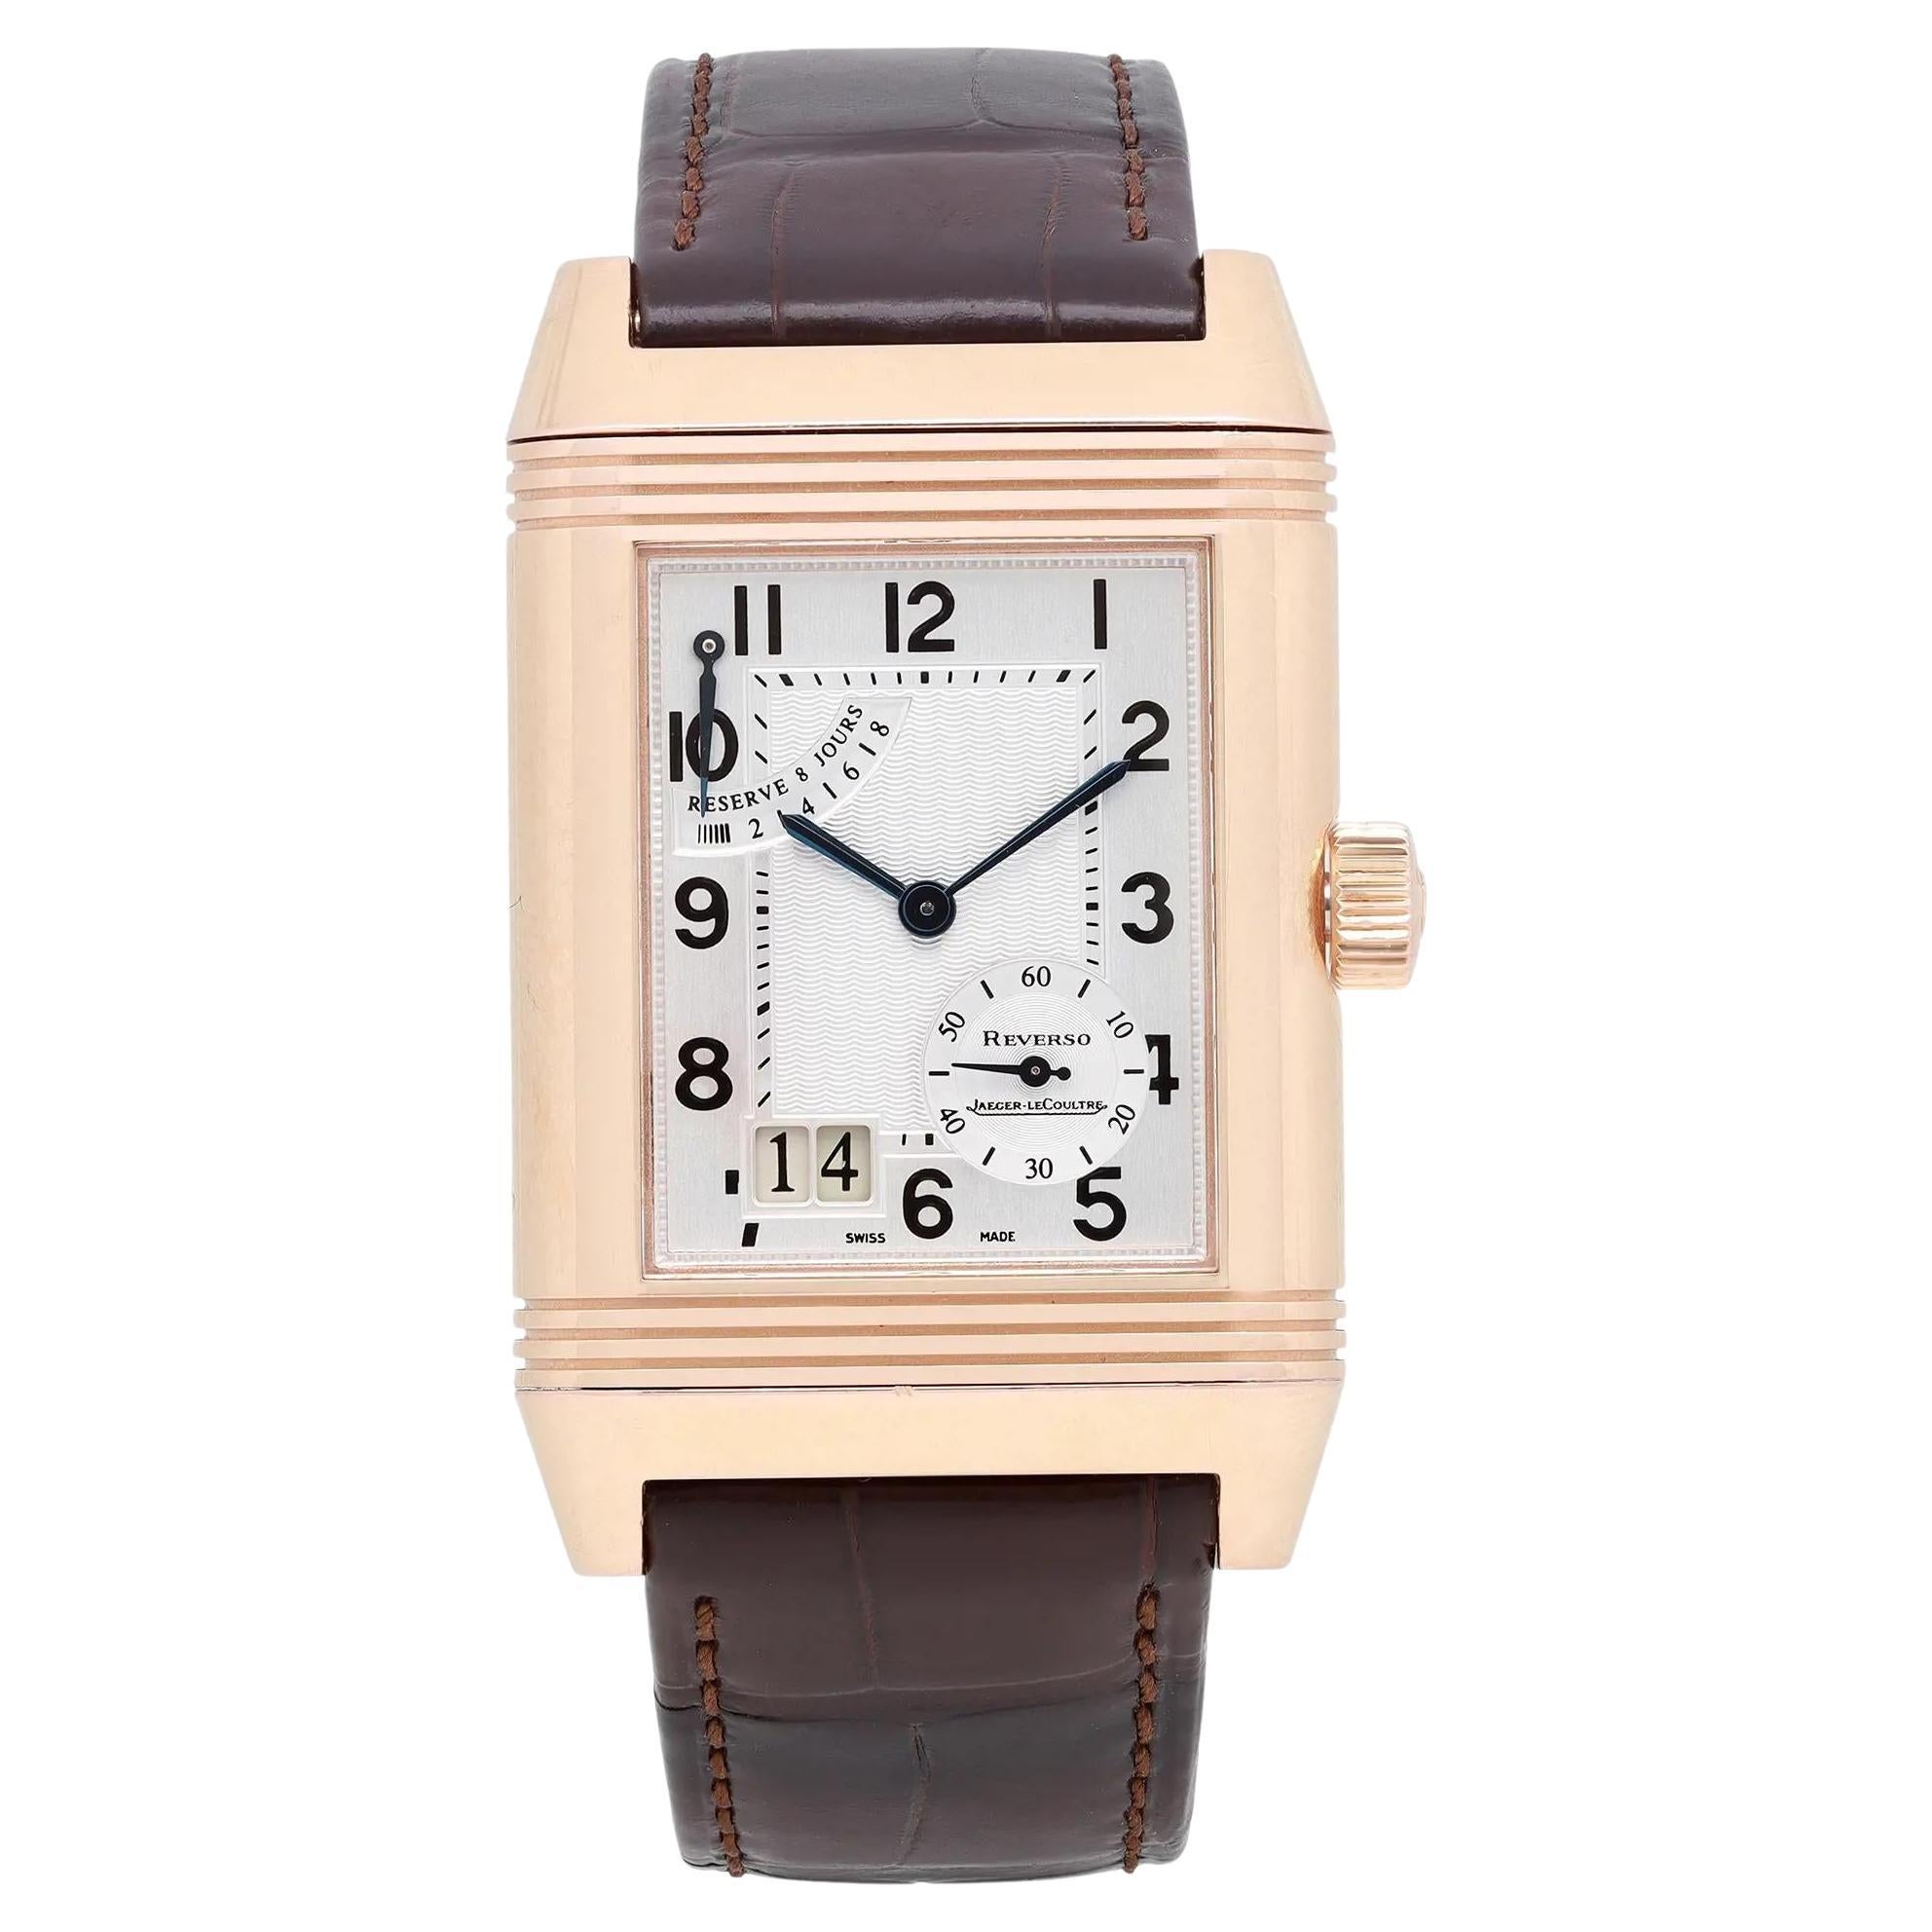 Jaeger-LeCoultre Reverso Grande 18k Rose Gold Silver Dial Watch Q300240 For Sale